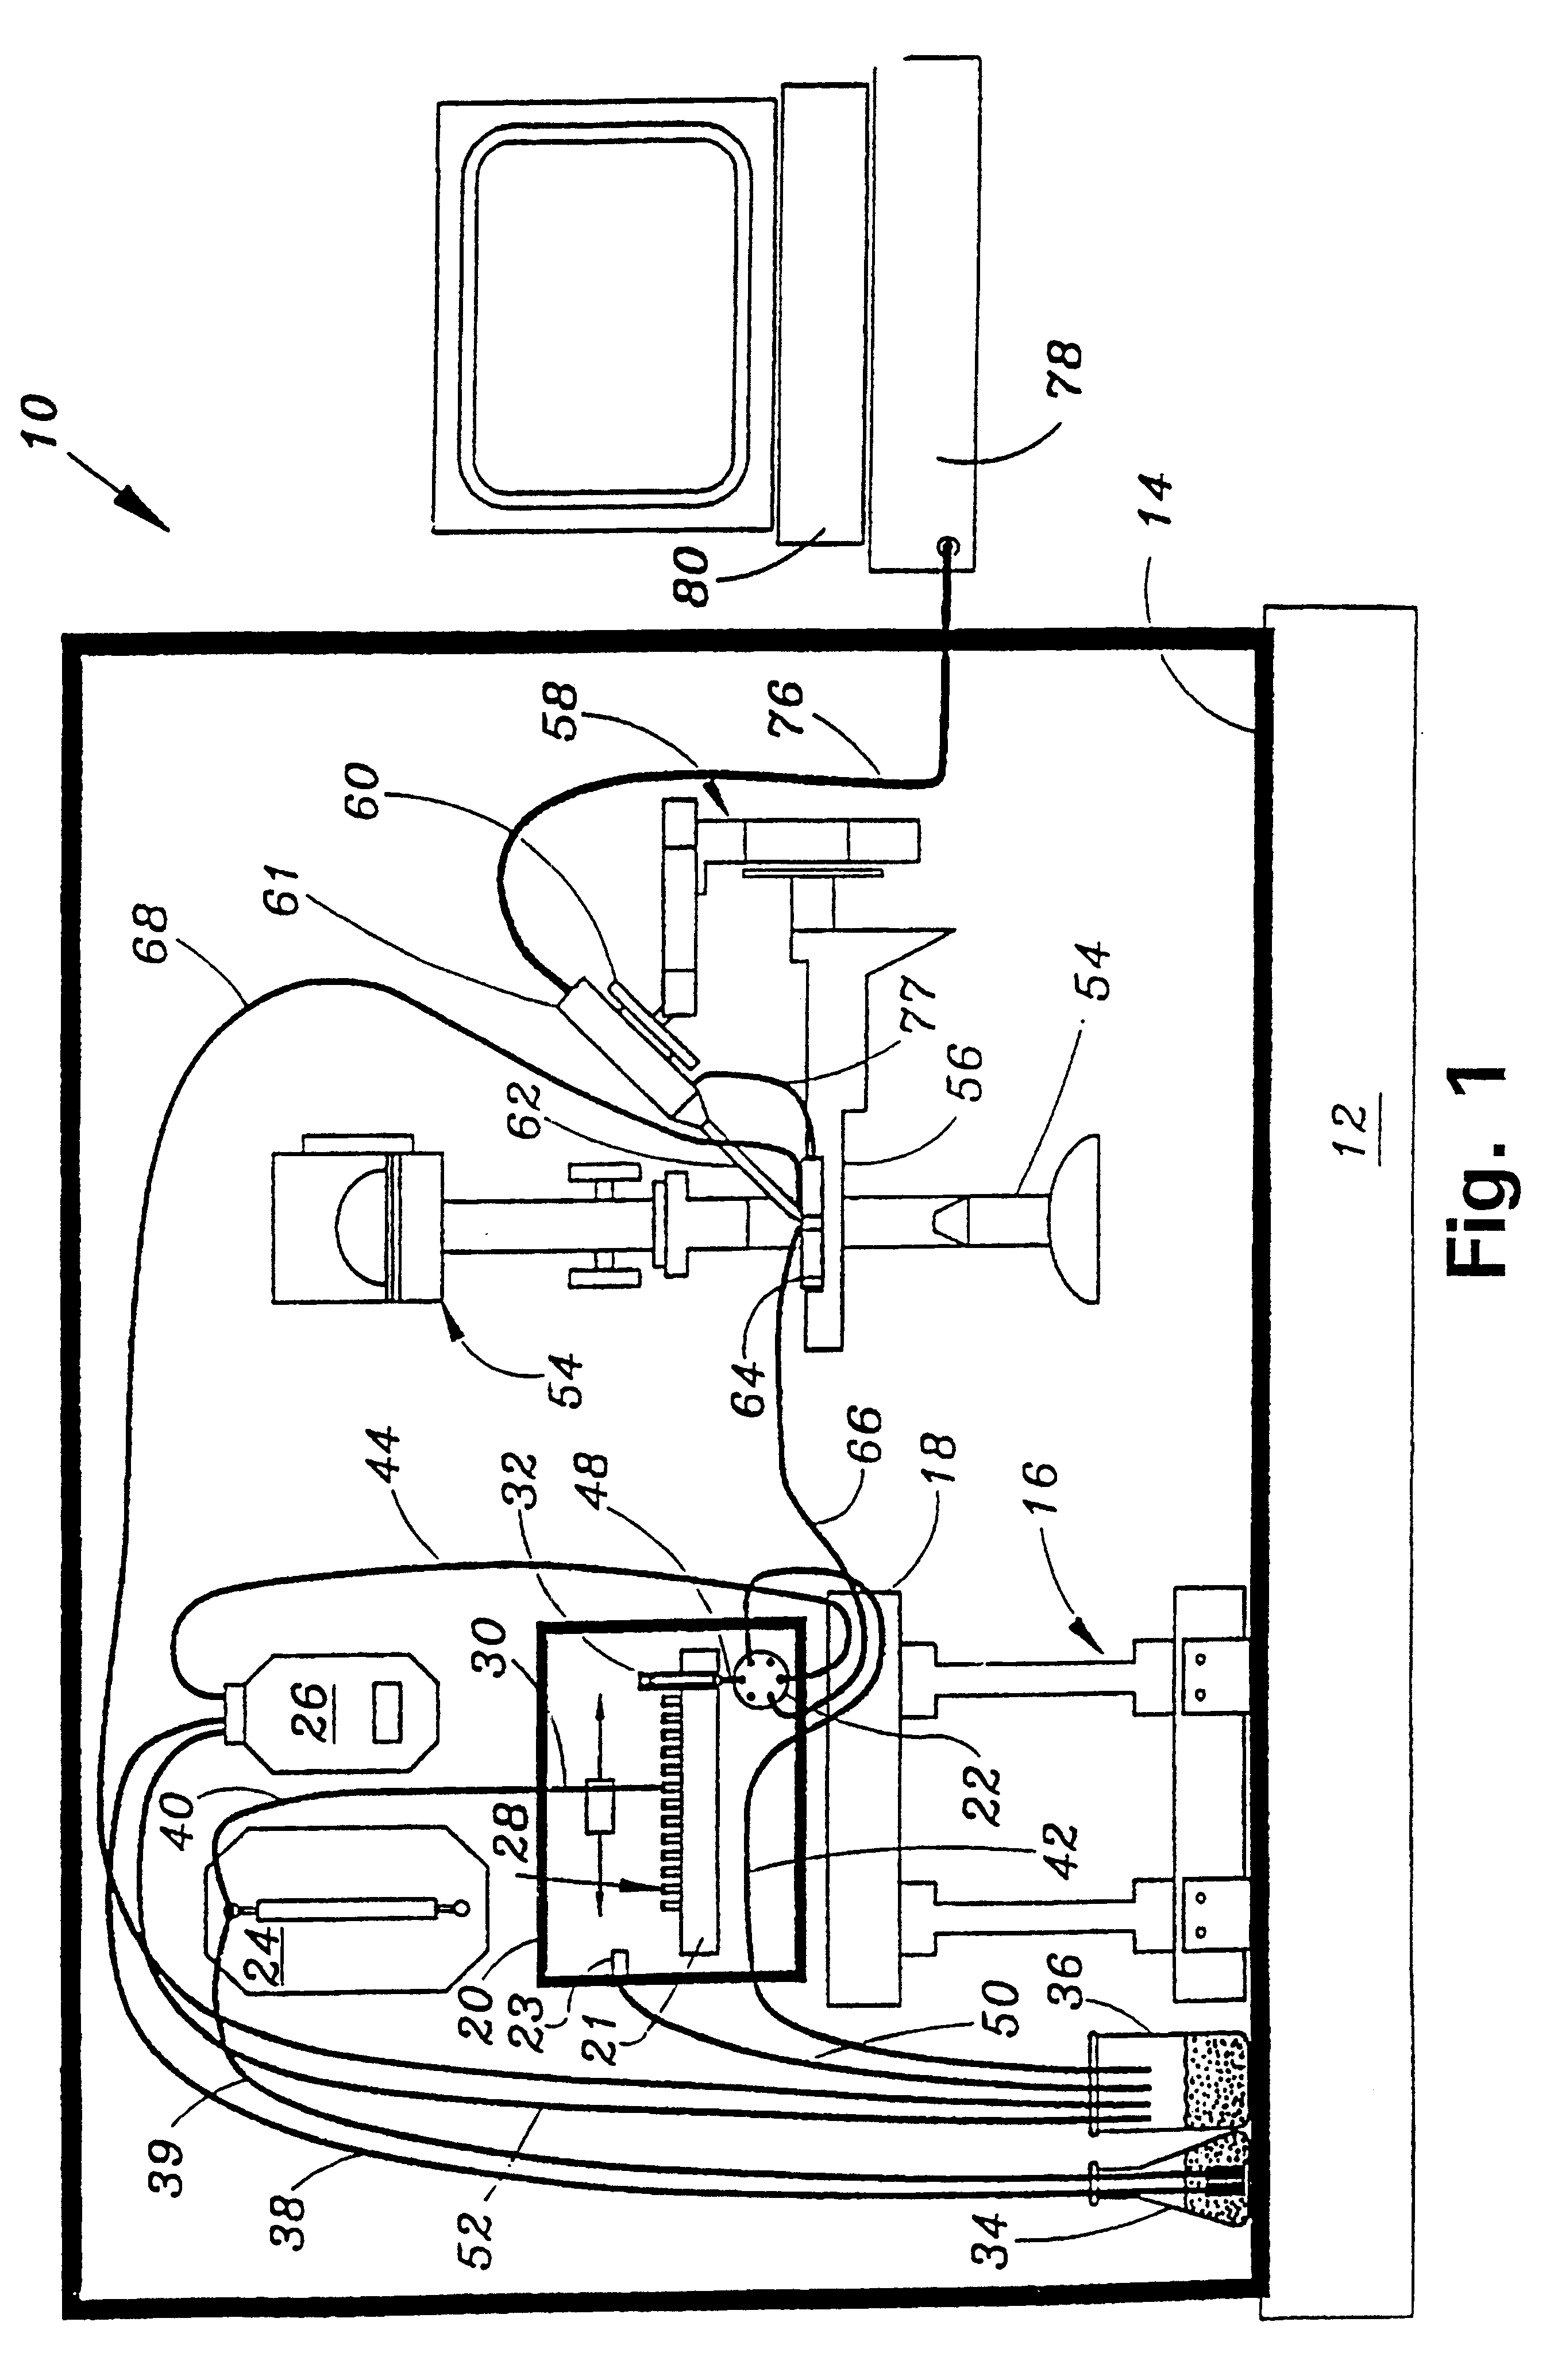 Automatic electrode positioning apparatus